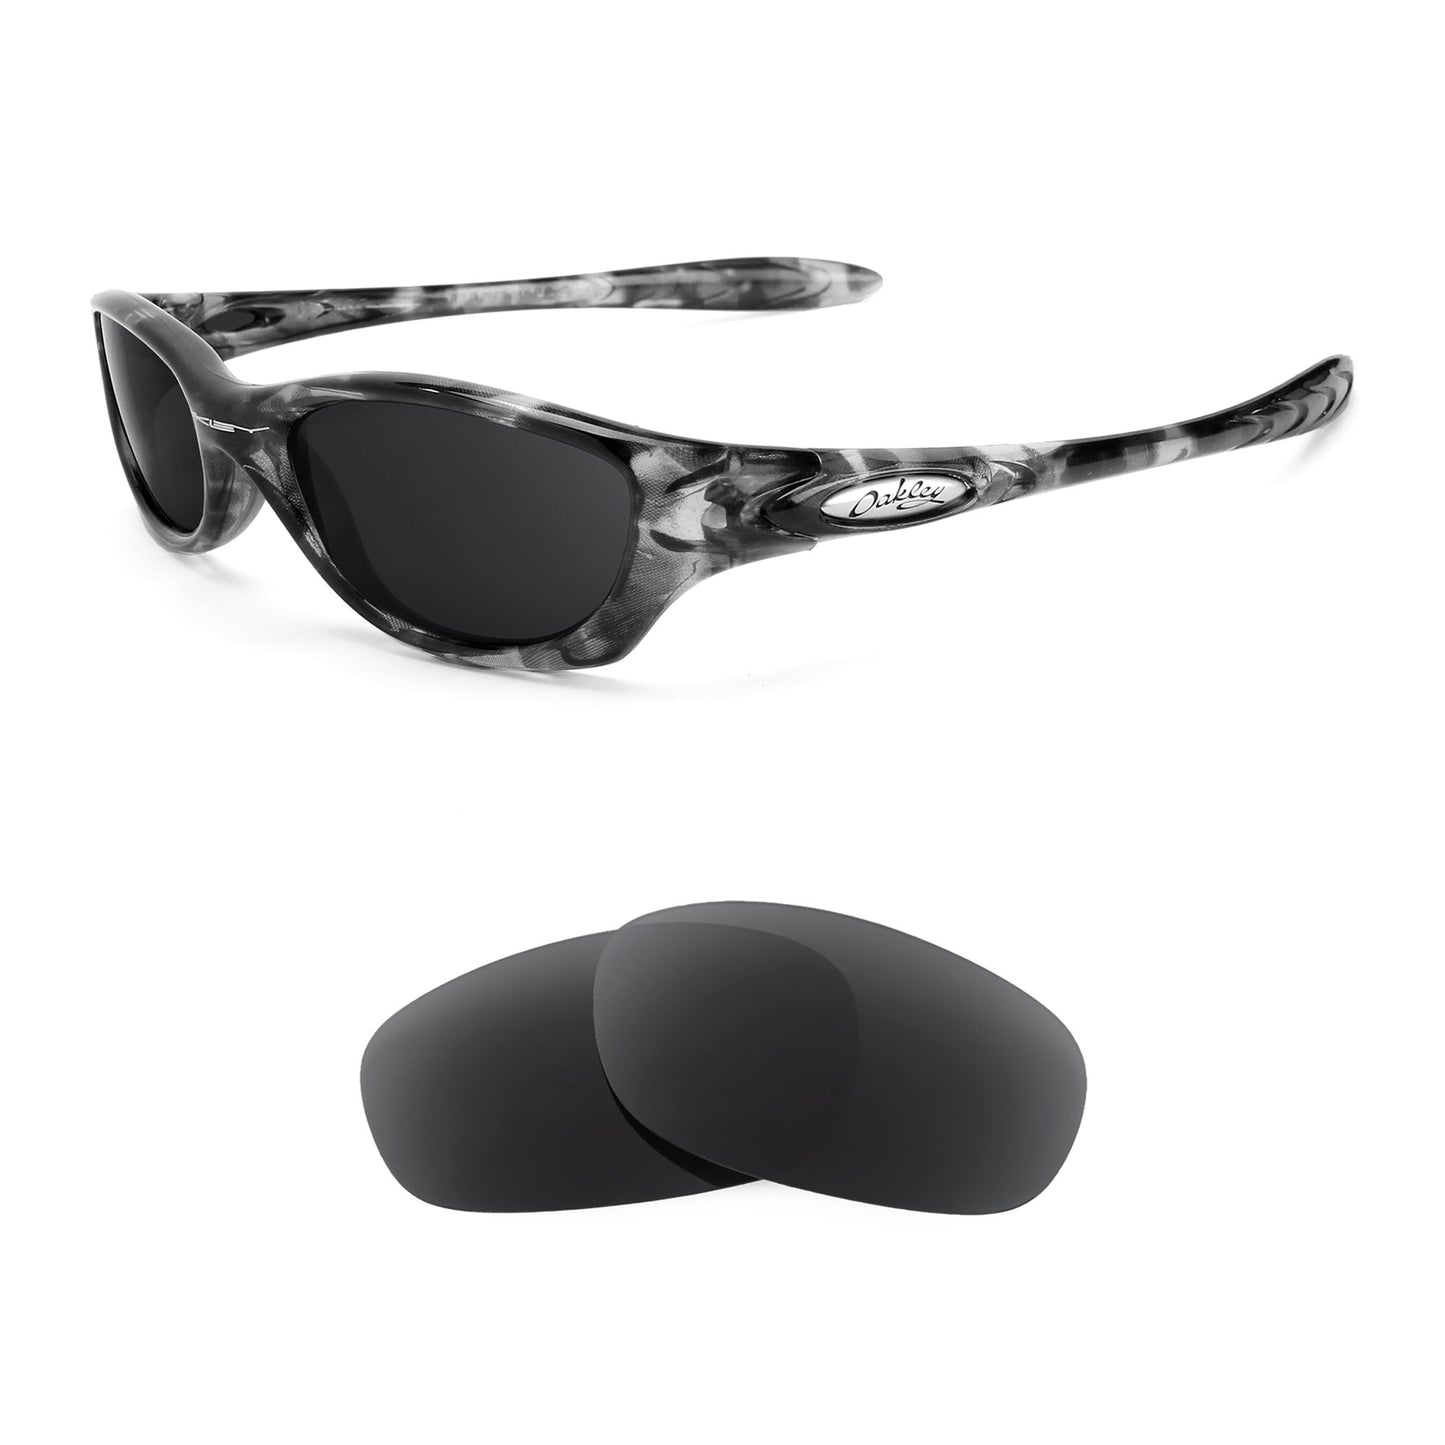 Oakley Fate sunglasses with replacement lenses